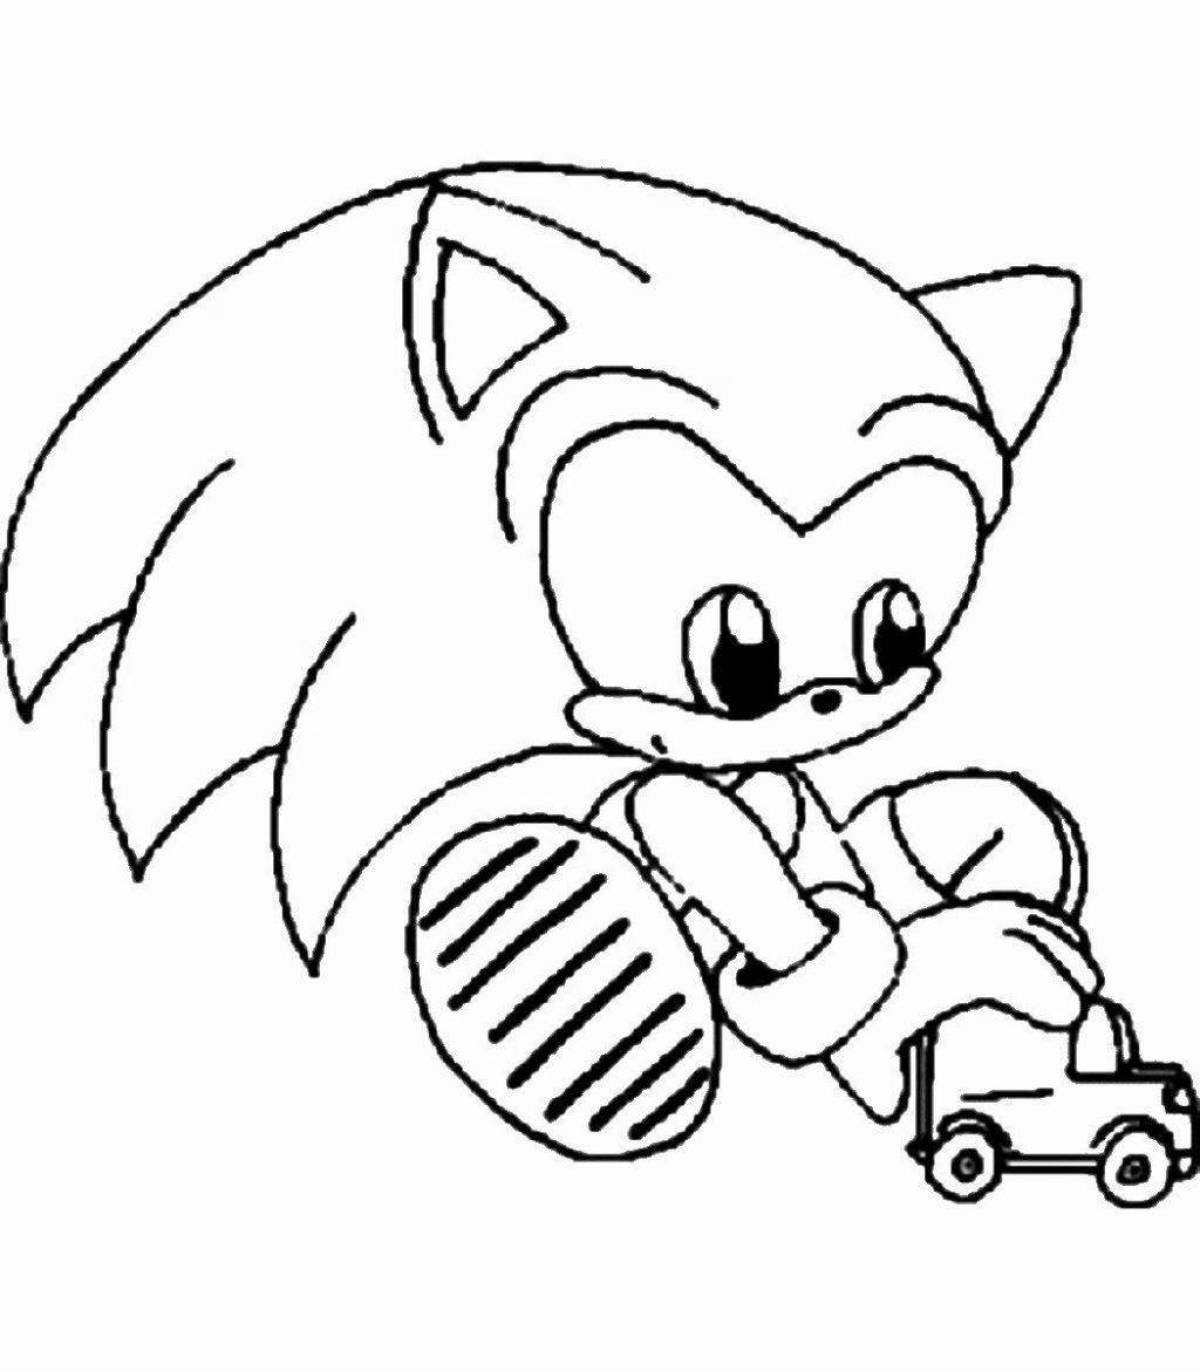 Exquisite super hedgehog sonic coloring page